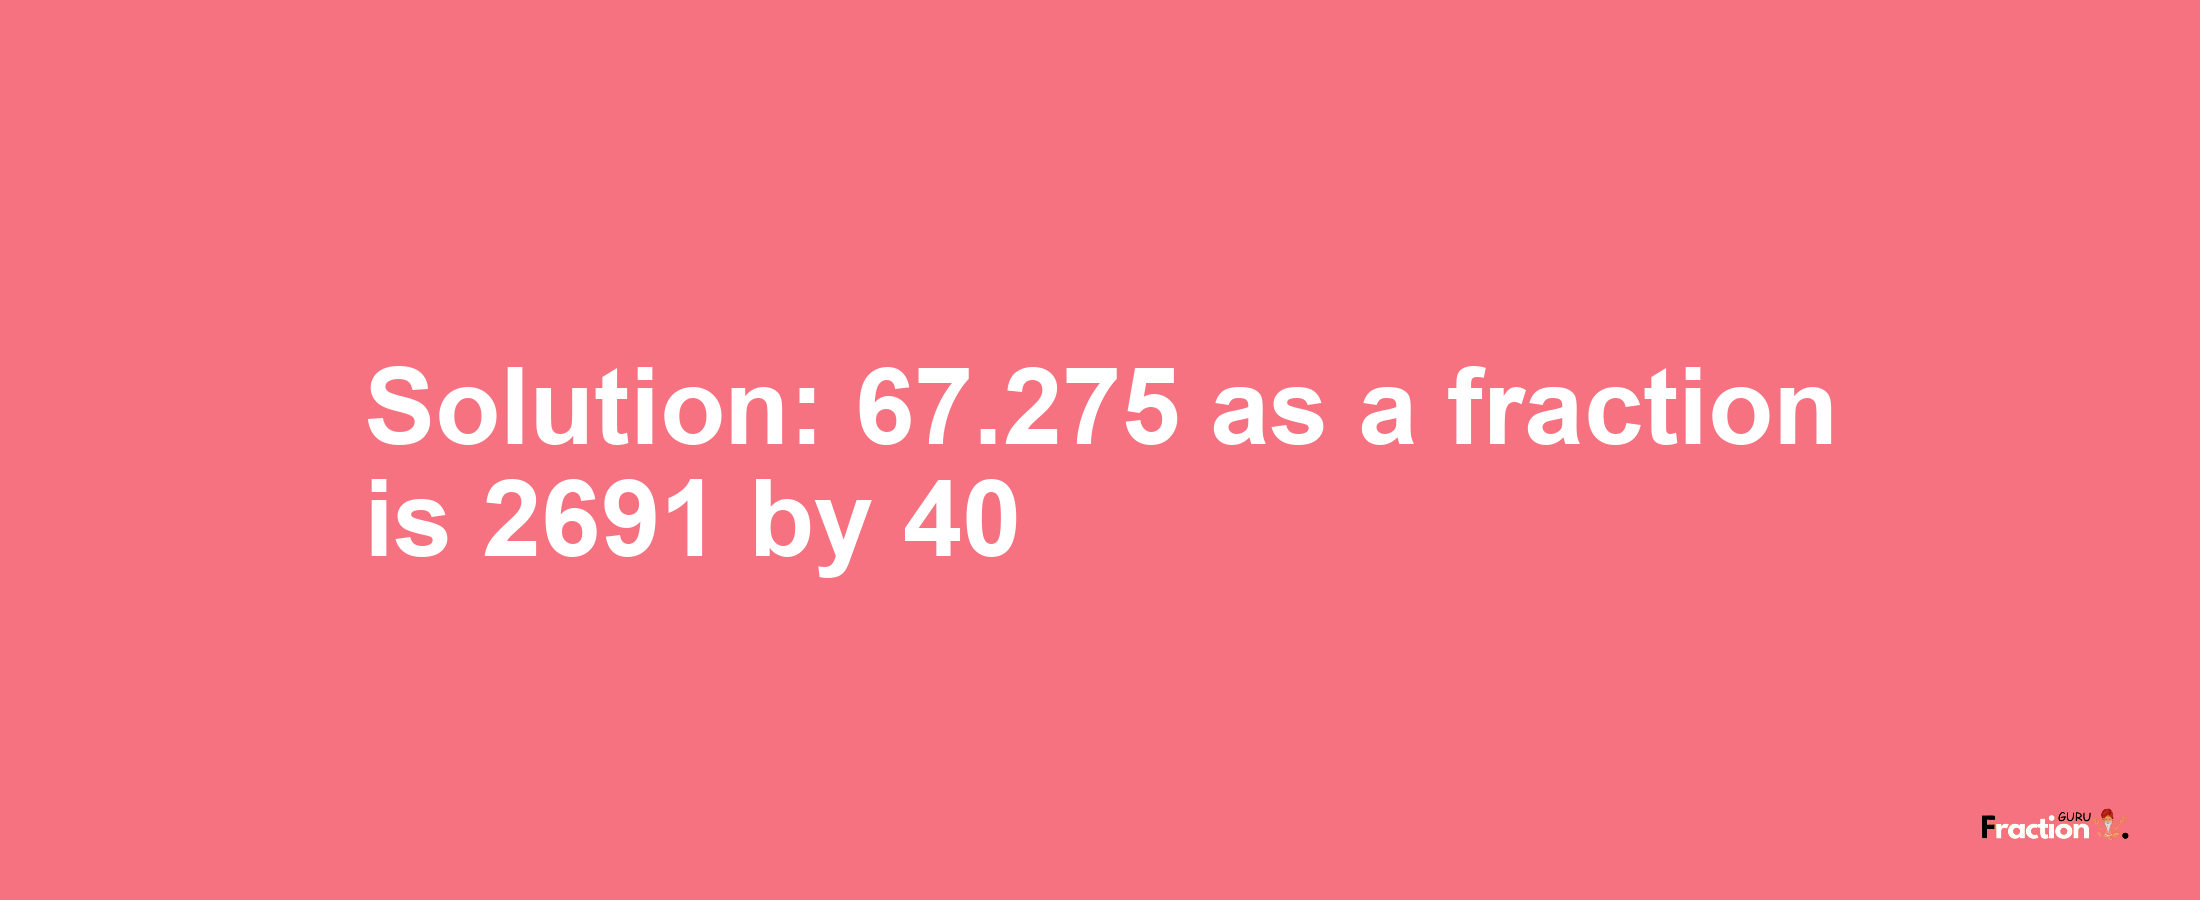 Solution:67.275 as a fraction is 2691/40